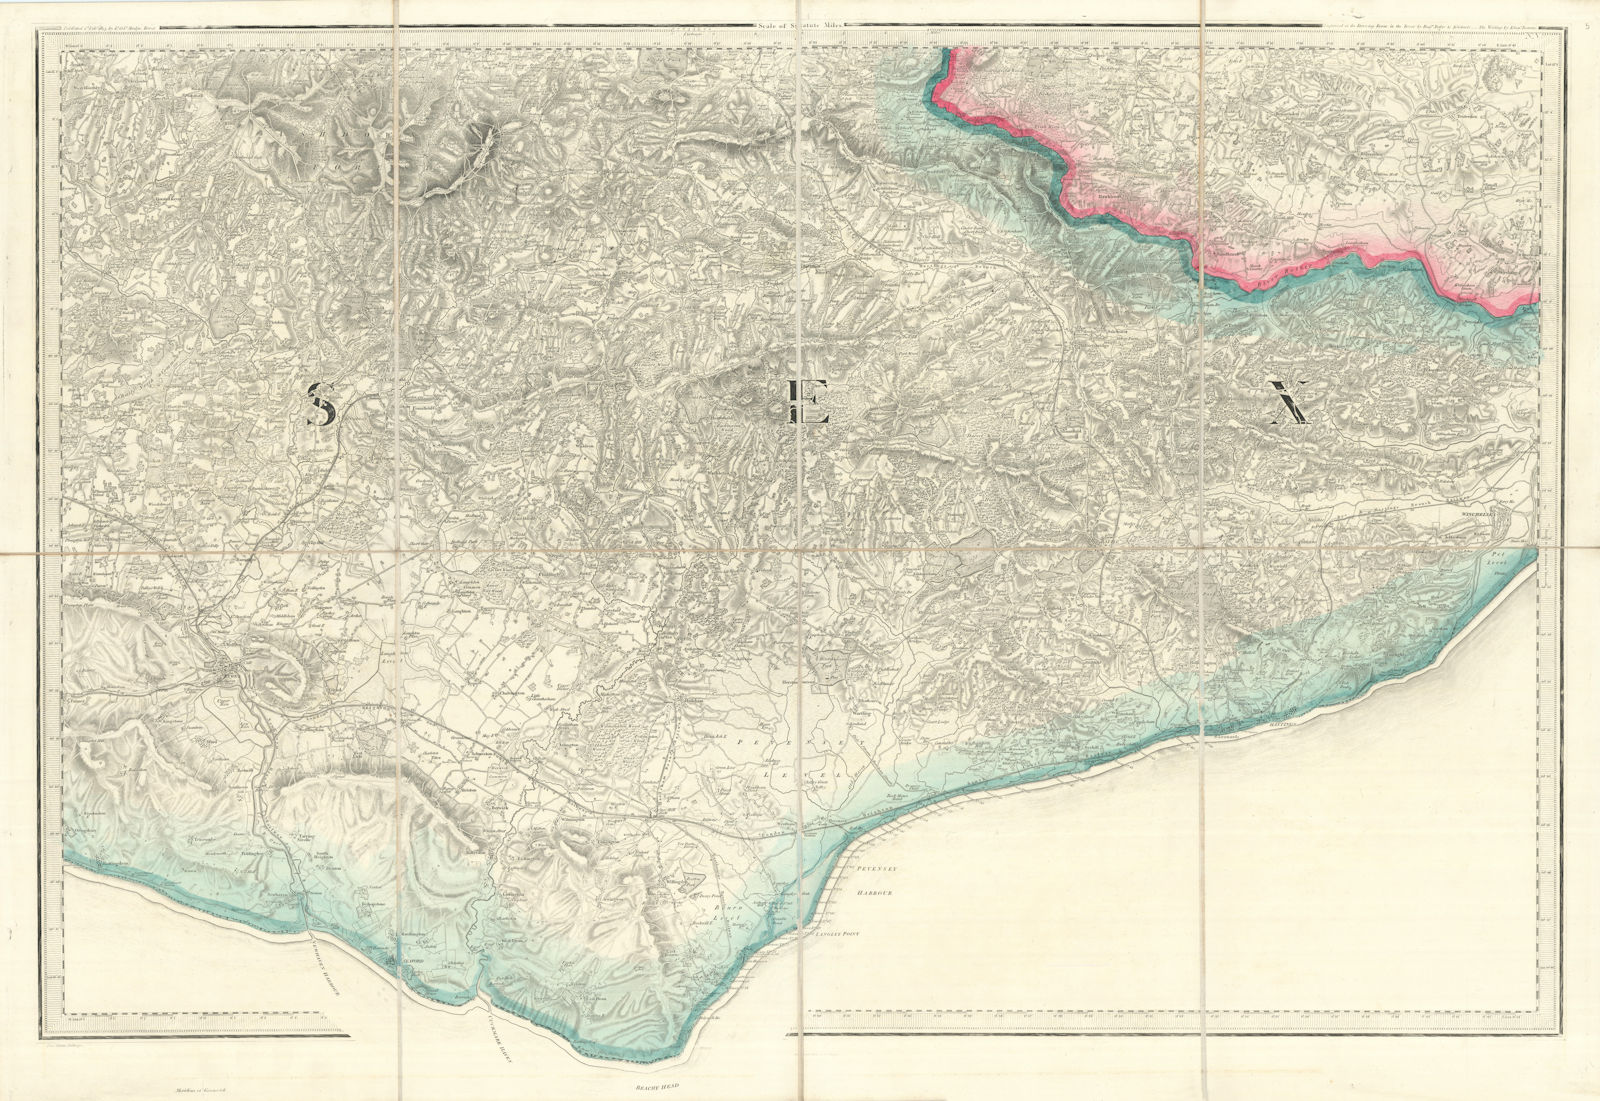 OS #5 Sussex Weald, Pevensey Levels & South Downs. Eastbourne Hastings  1813 map